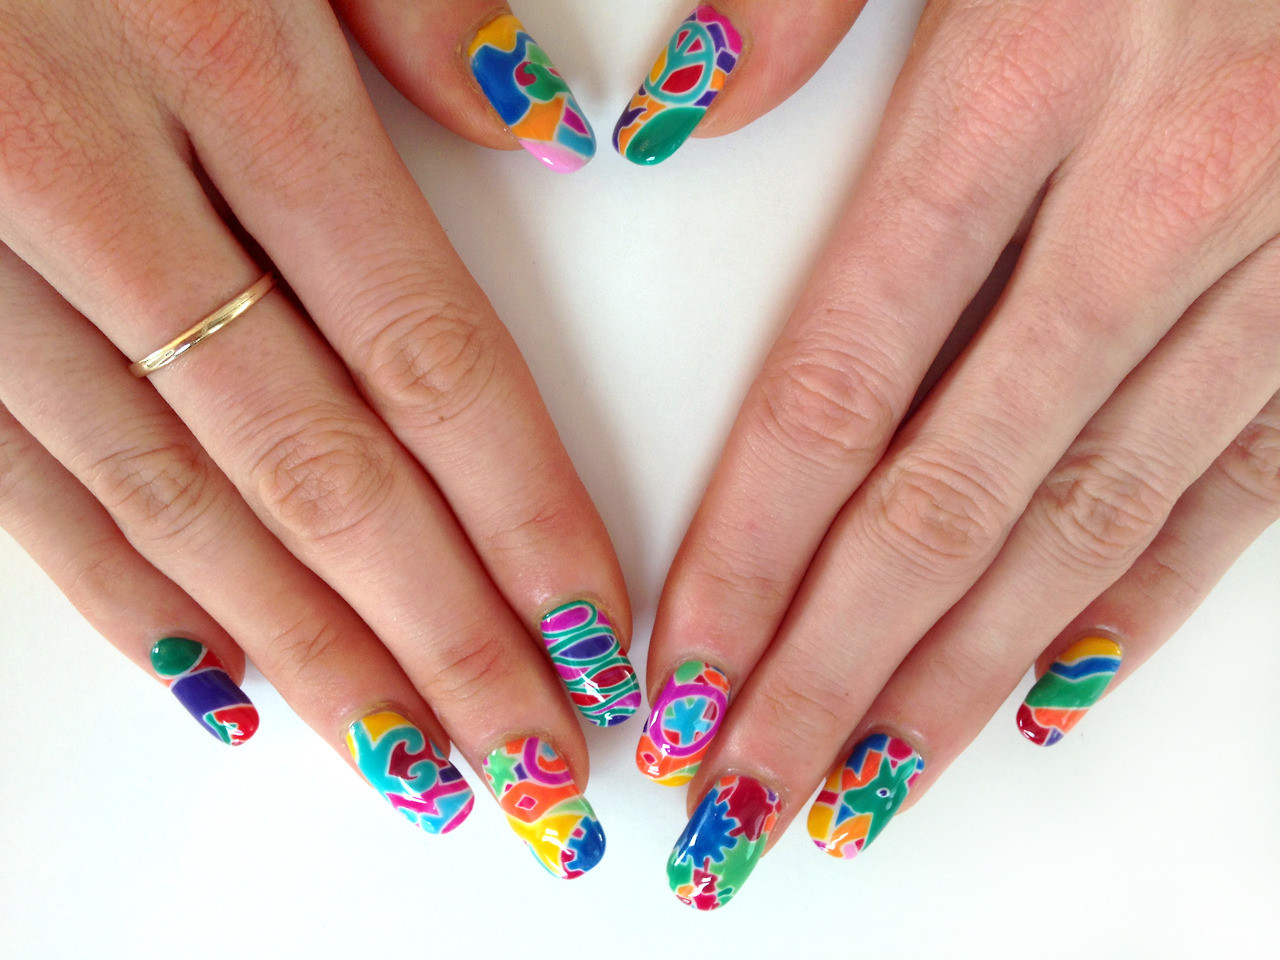 6. Nail Art Association with Art History - wide 2